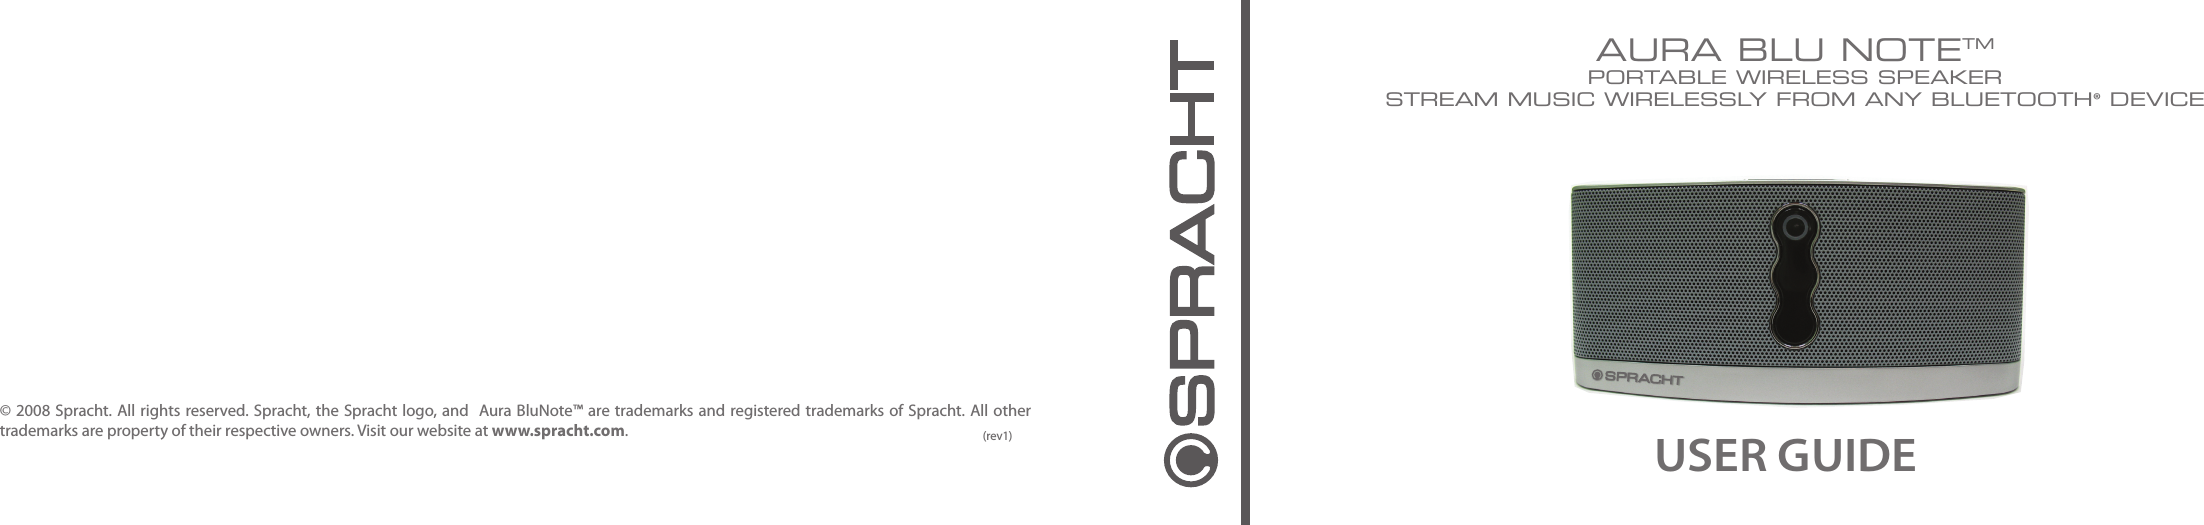 © 2008 Spracht. All rights reserved. Spracht, the Spracht logo, and  Aura BluNote™ are trademarks and registered trademarks of Spracht. All other trademarks are property of their respective owners. Visit our website at www.spracht.com. AURA BLU NOTETMPORTABLE WIRELESS SPEAKERSTREAM MUSIC WIRELESSLY FROM ANY BLUETOOTH® DEVICEUSER GUIDE(rev1)